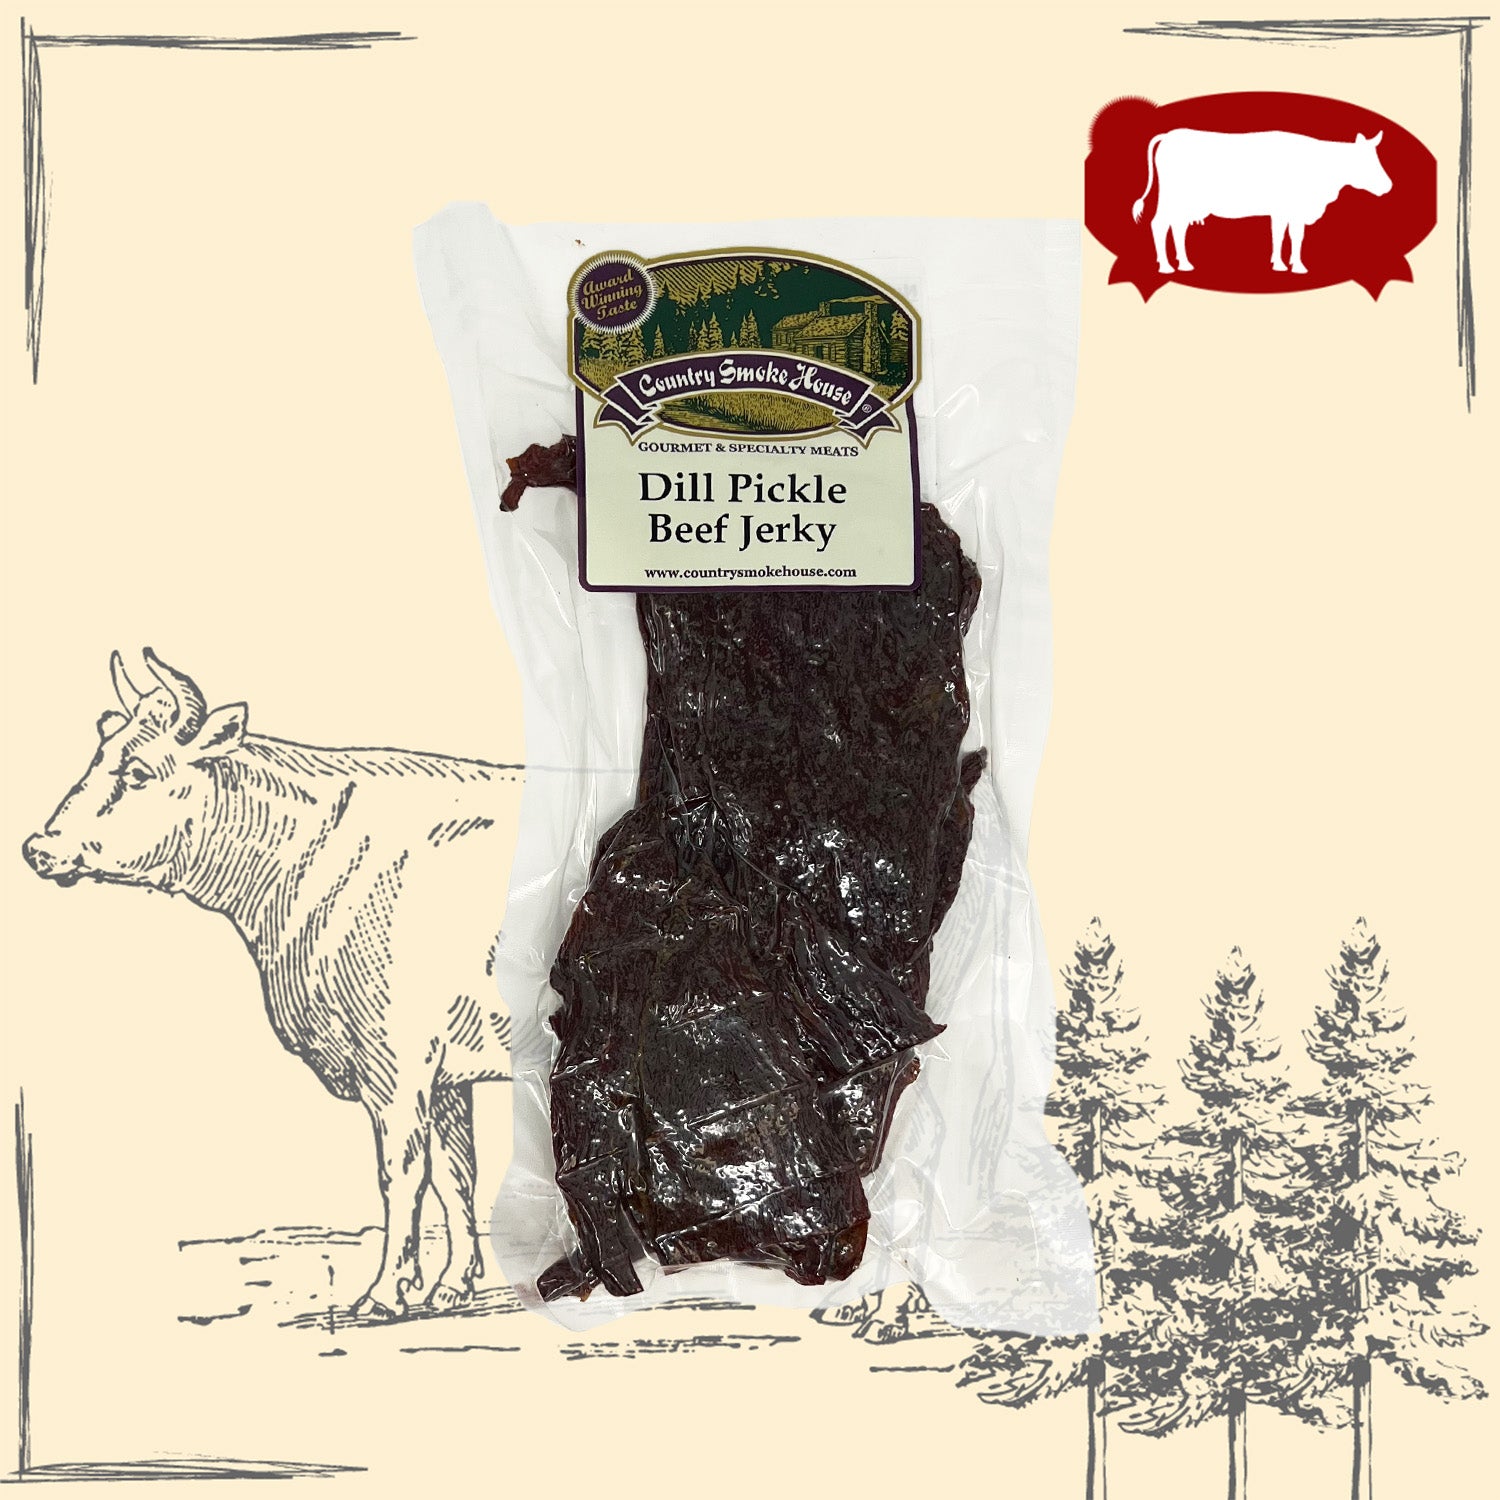 Premium beef cuts infused with tangy dill pickle seasoning, offering a savory and unique snack.